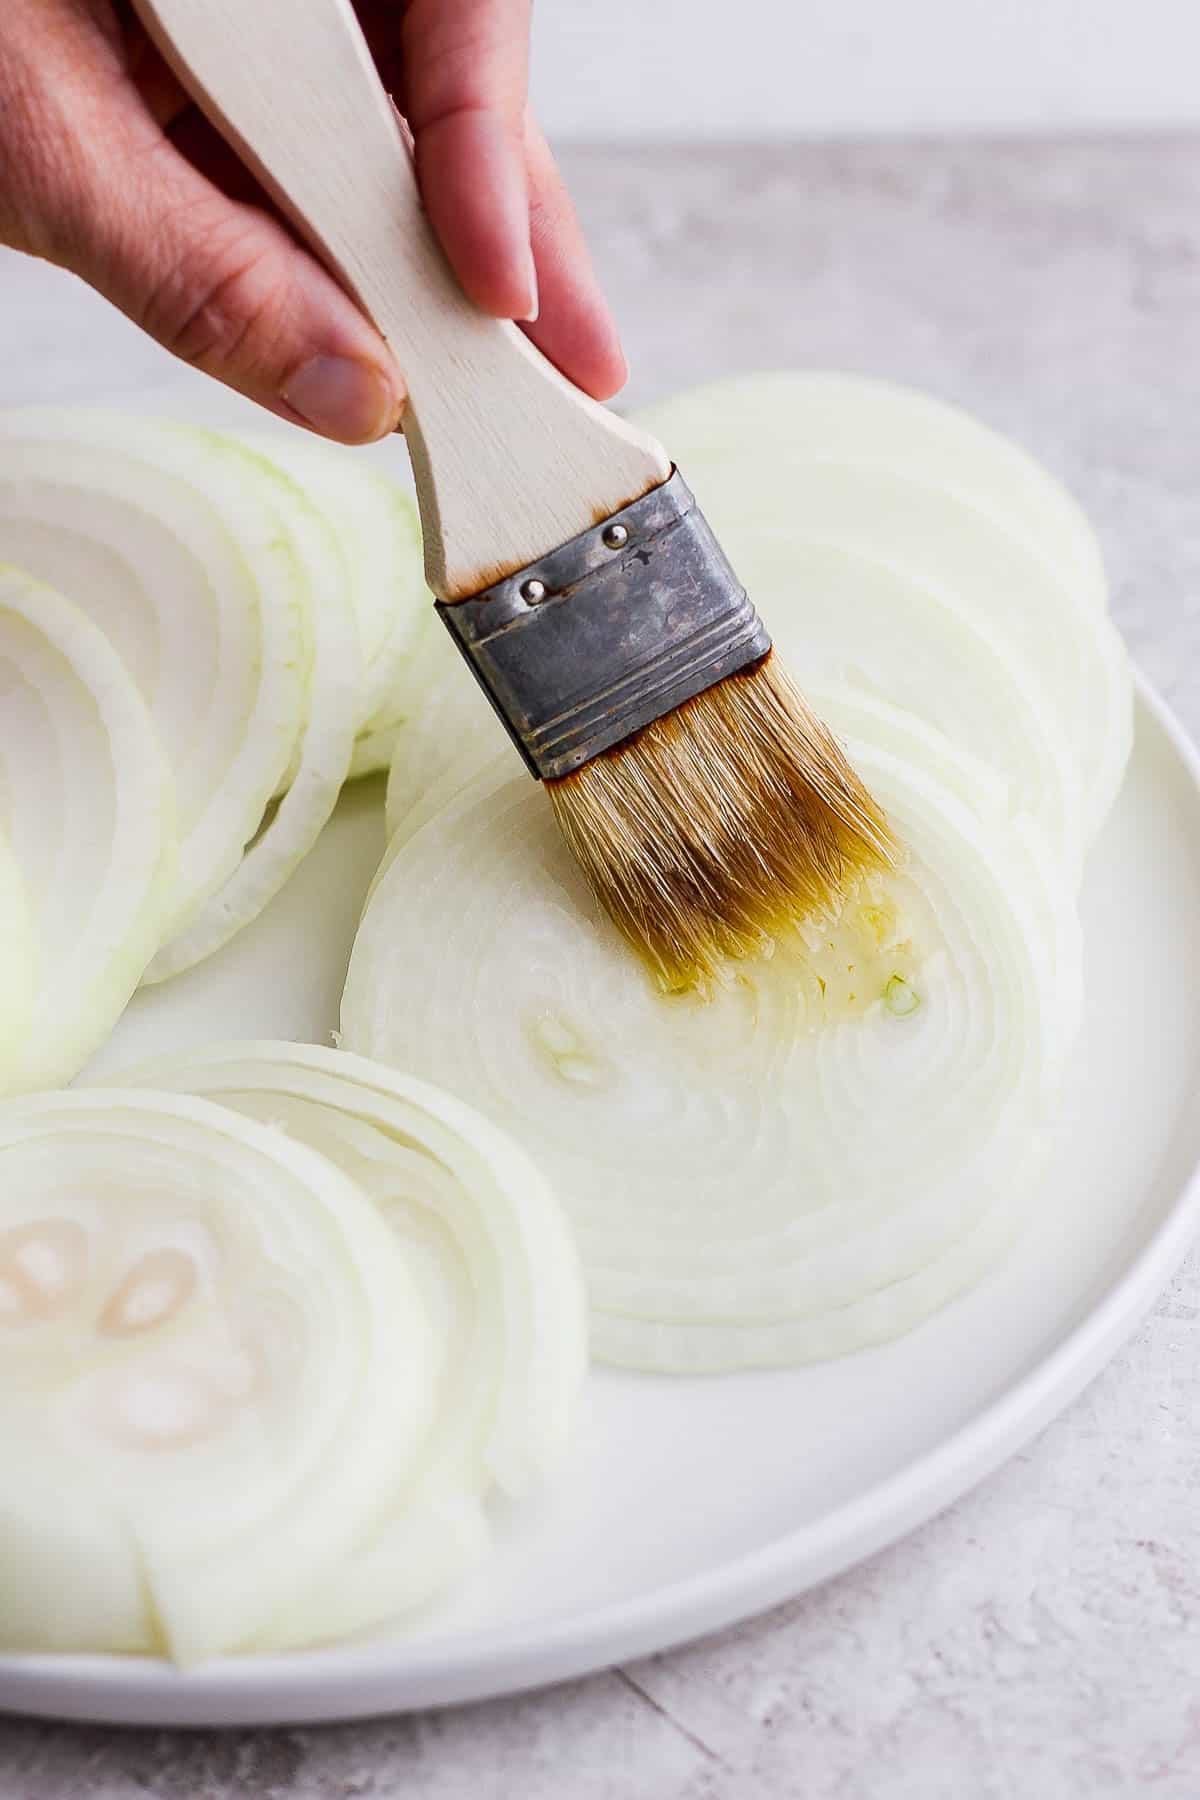 Onion slices on a plate being brushed with olive oil.